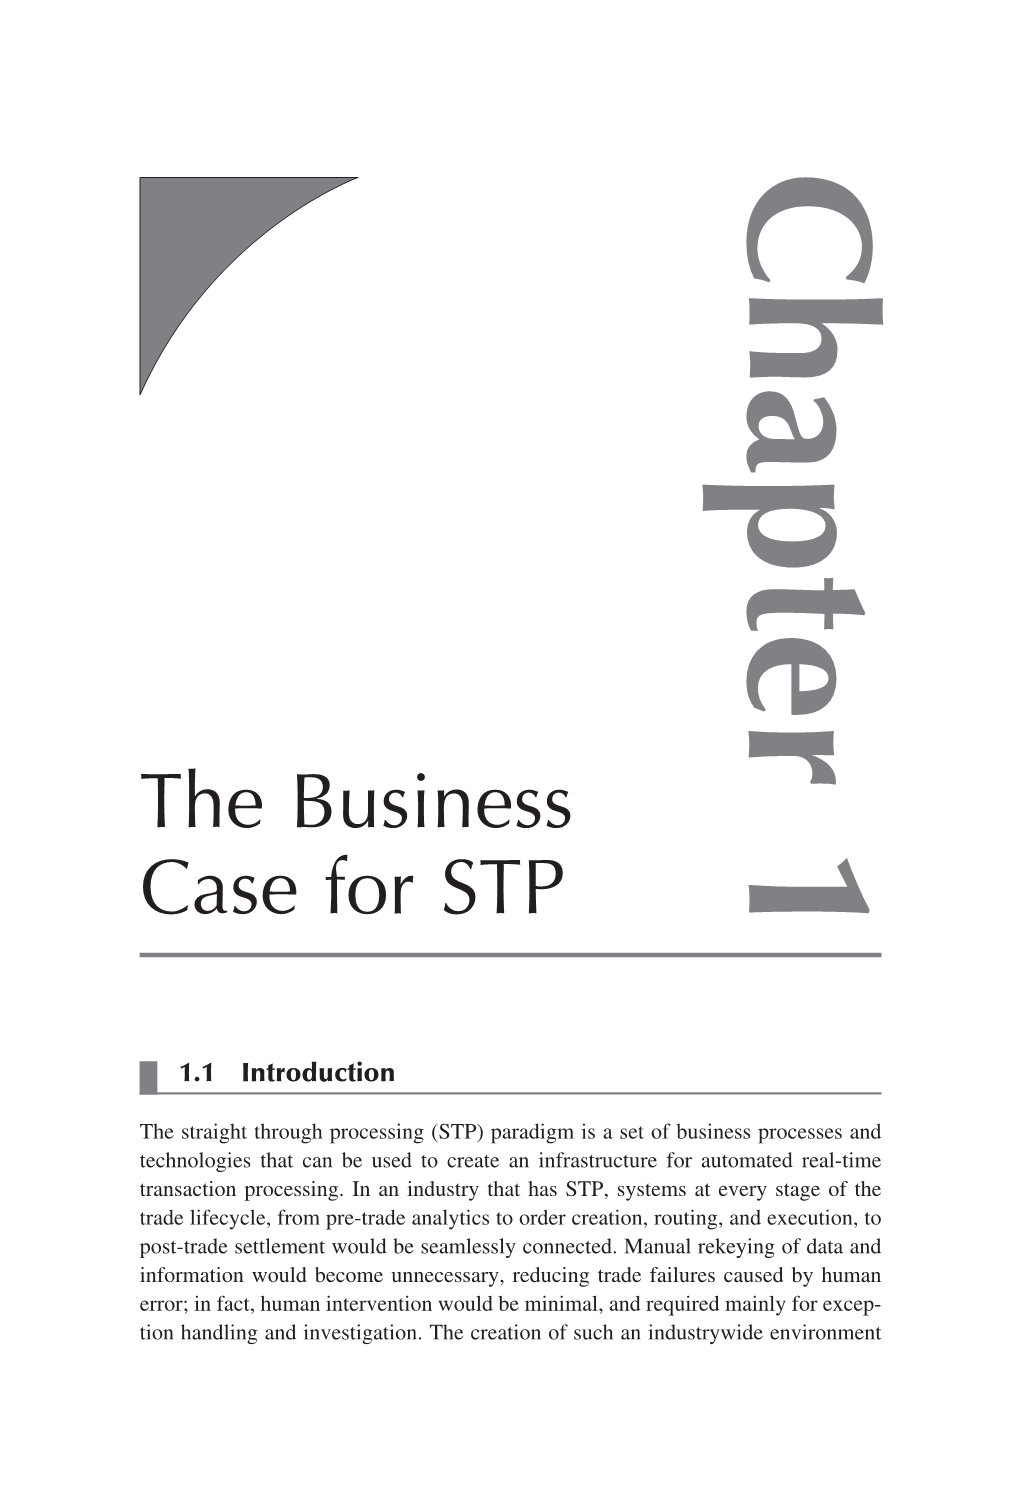 The Business Case for STP 7 4 6 6 4 P - 1 0 0 H Cch001-P466470.Indd 1 2 Straight Through Processing for Financial Services